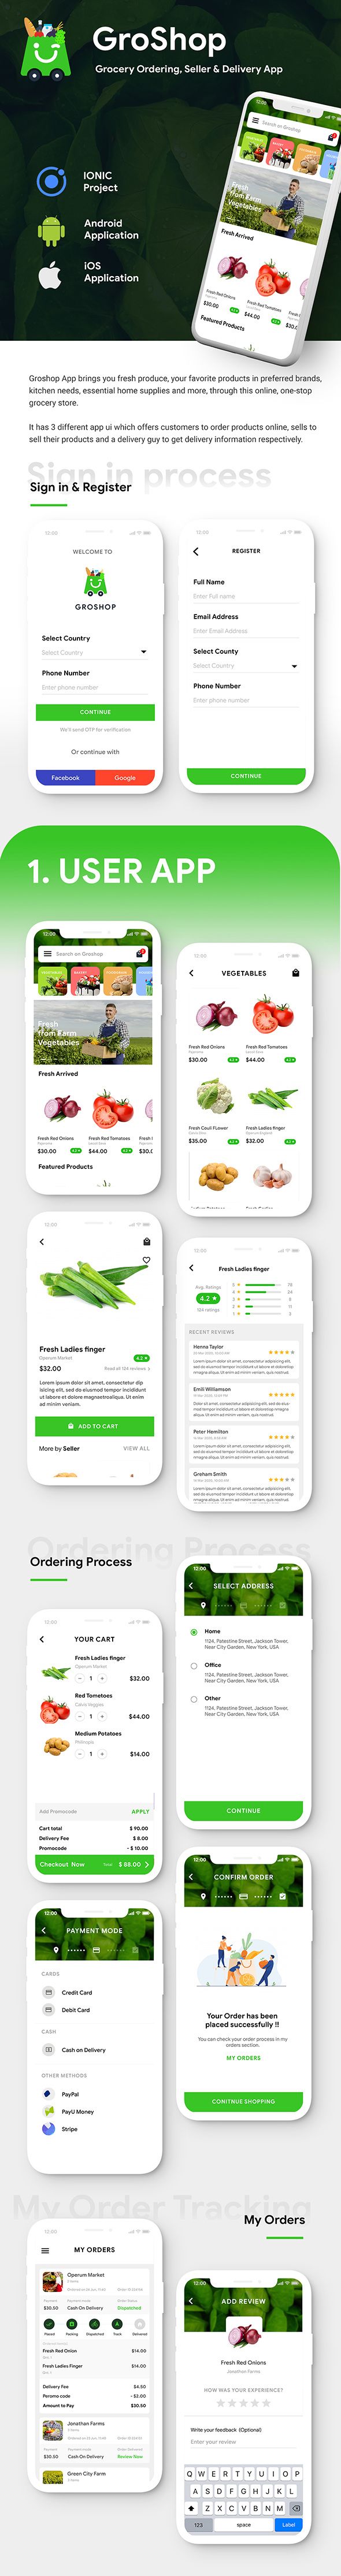 Grocery Android App Template + Grocery ordering iOS App Template| IONIC 5 | Groshop - 2